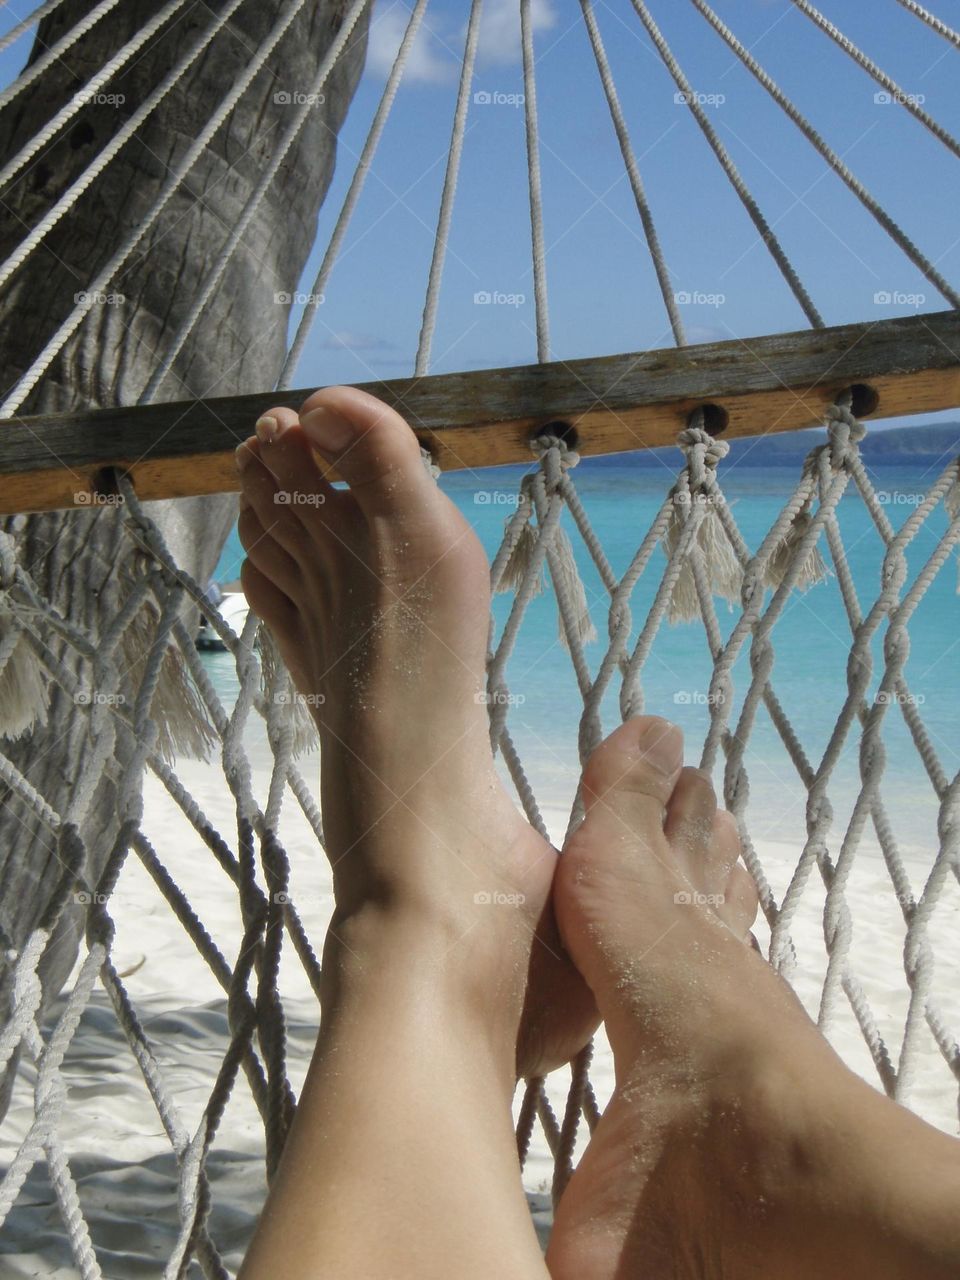 Best summer ever chilling on a hammock looking at turquoise waters of Jost Van Dyke BVI